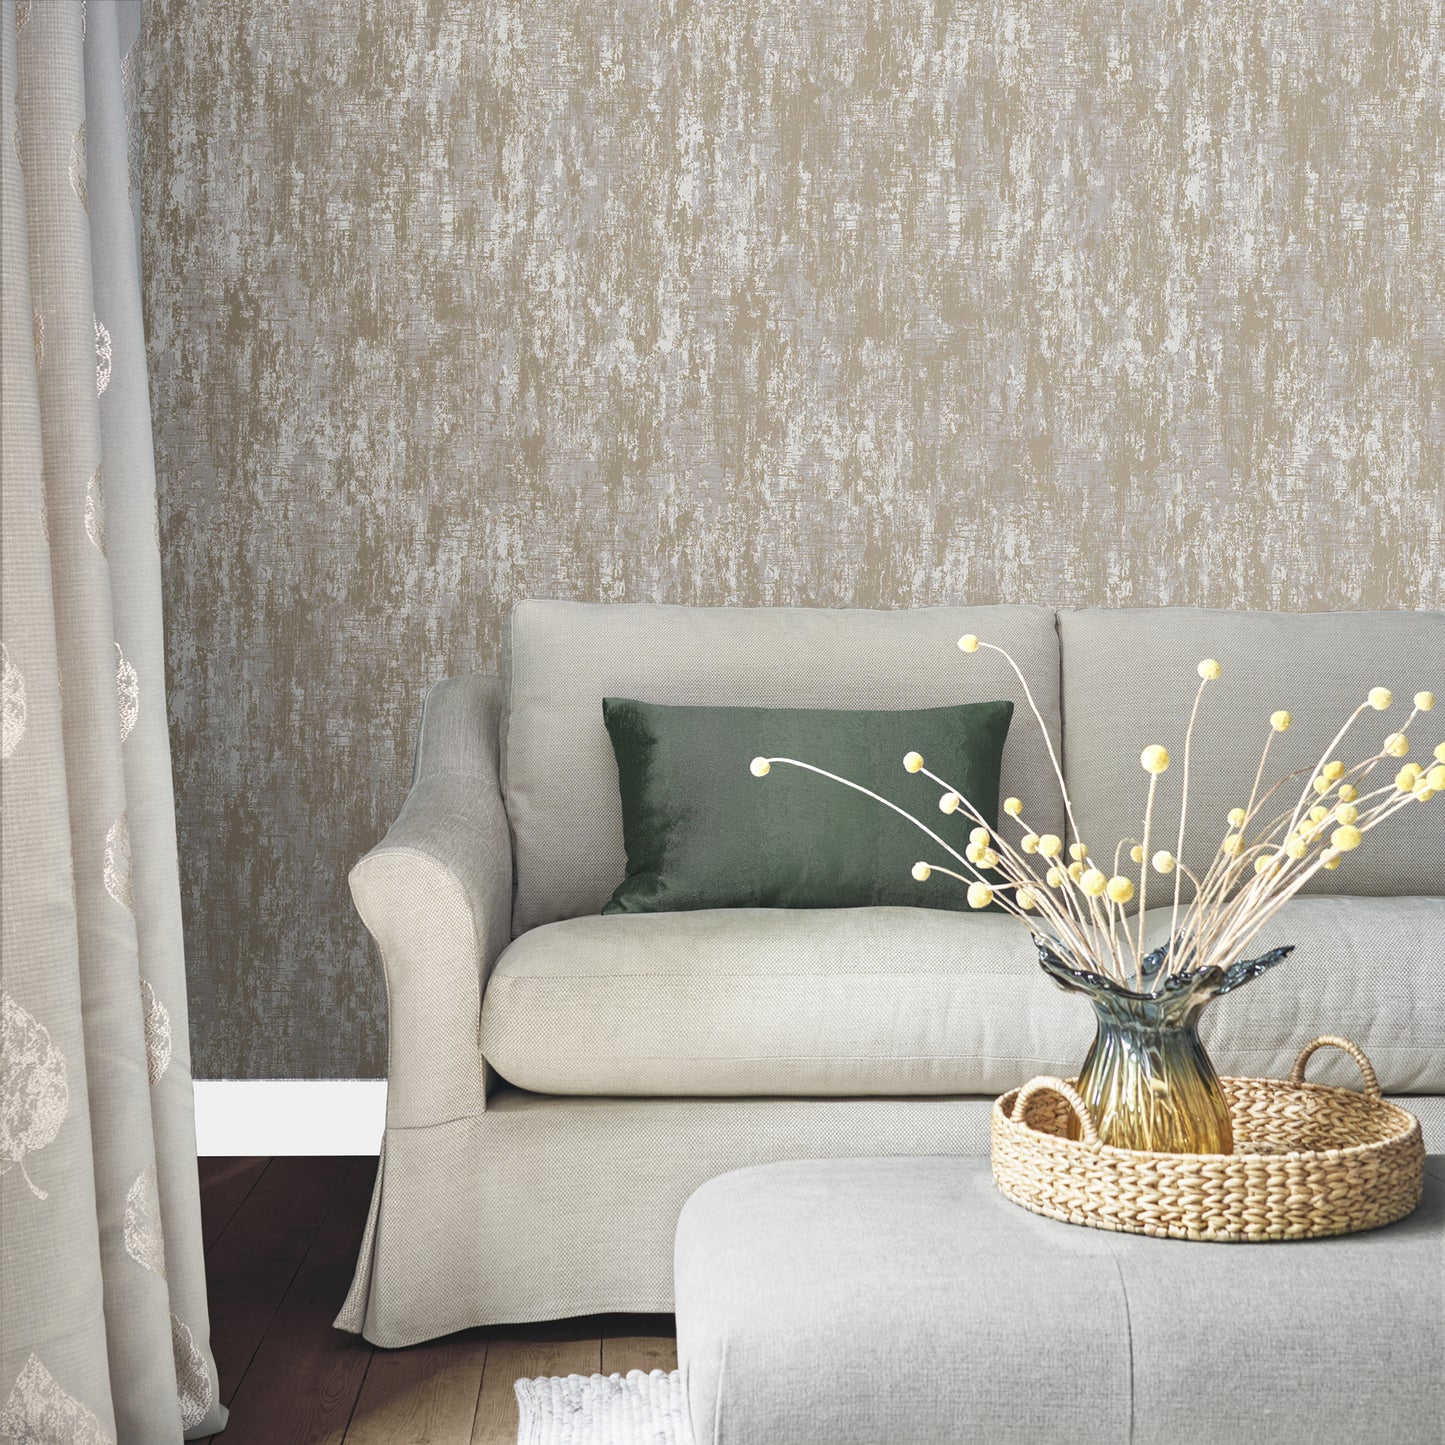 Laura Ashley Whinfell Champagne Wallpaper (114916)